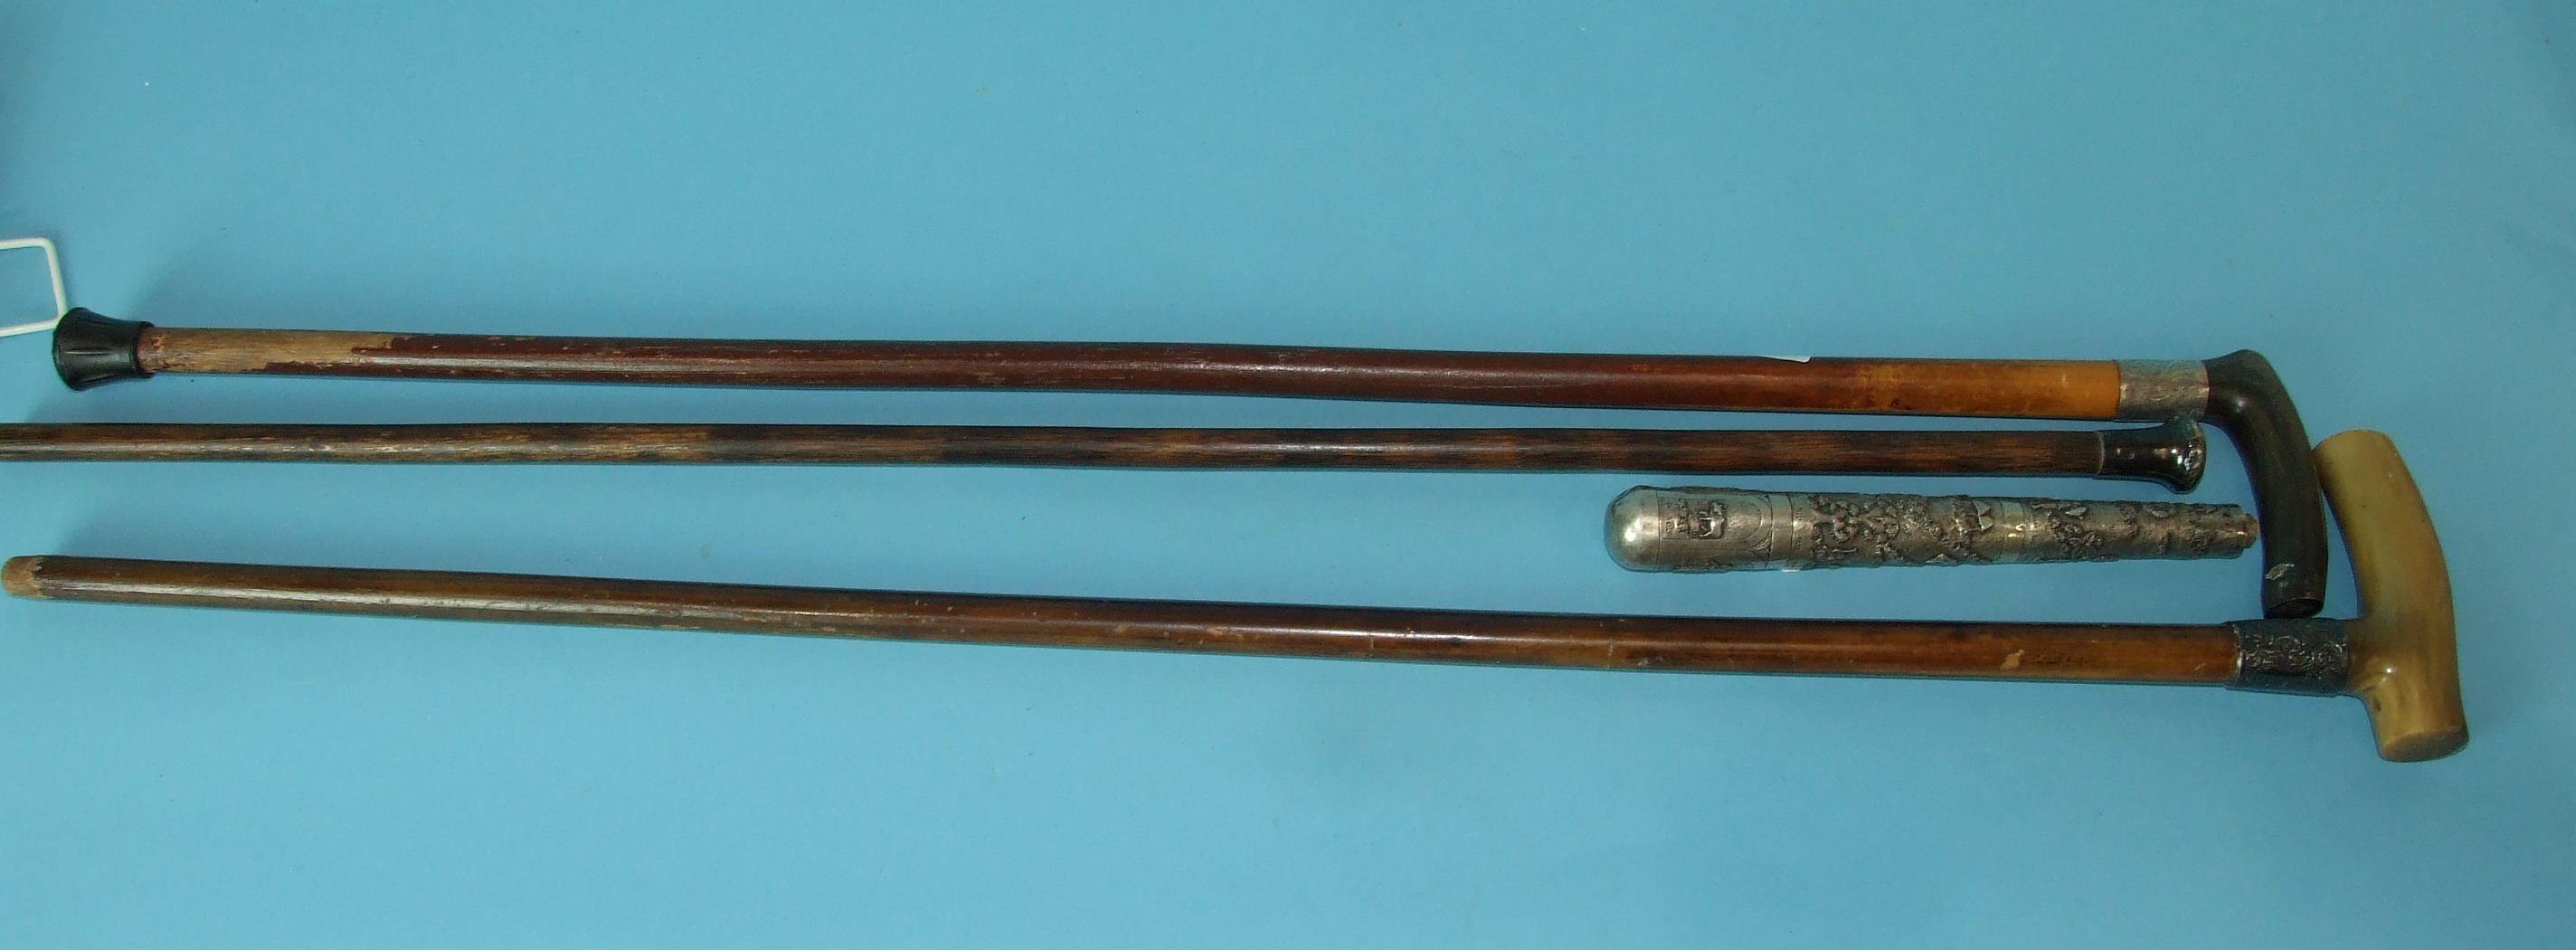 Three silver-mounted walking canes and a Burmese white metal parasol handle, (4). - Image 2 of 2